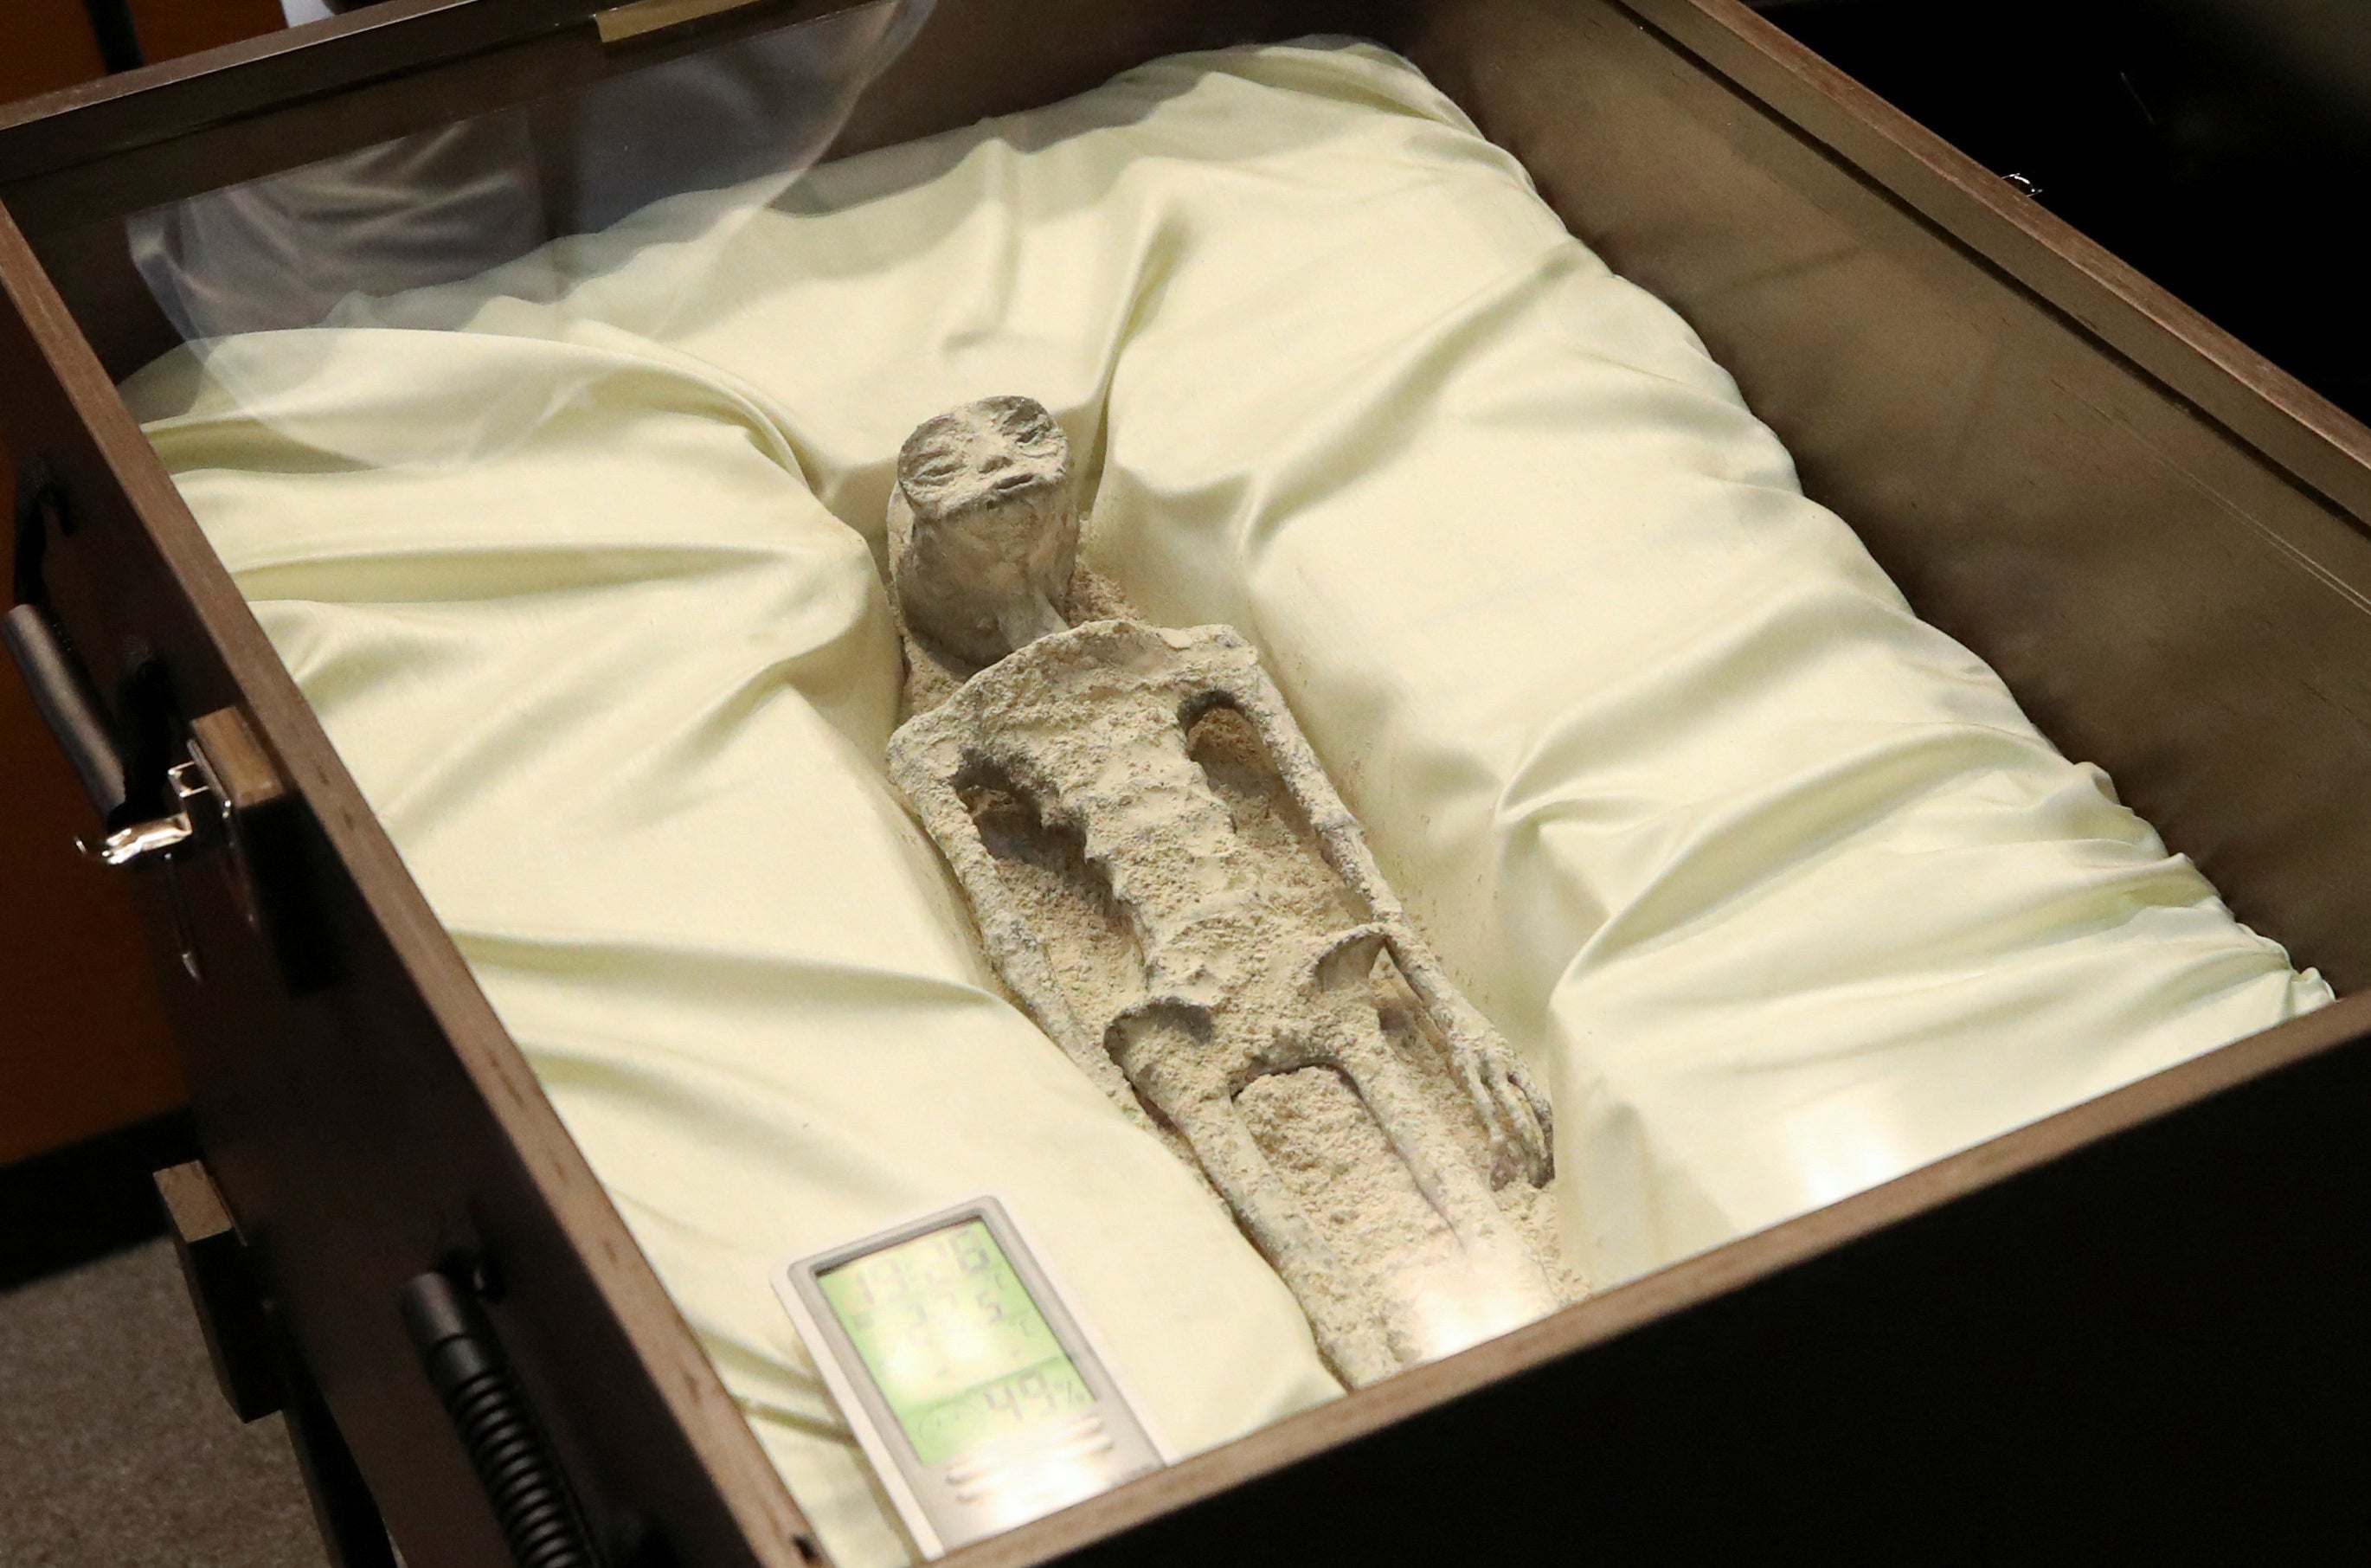 bizarre case of peru alien mummies takes another turn as officials raid ‘pregnant specimen’ press conference